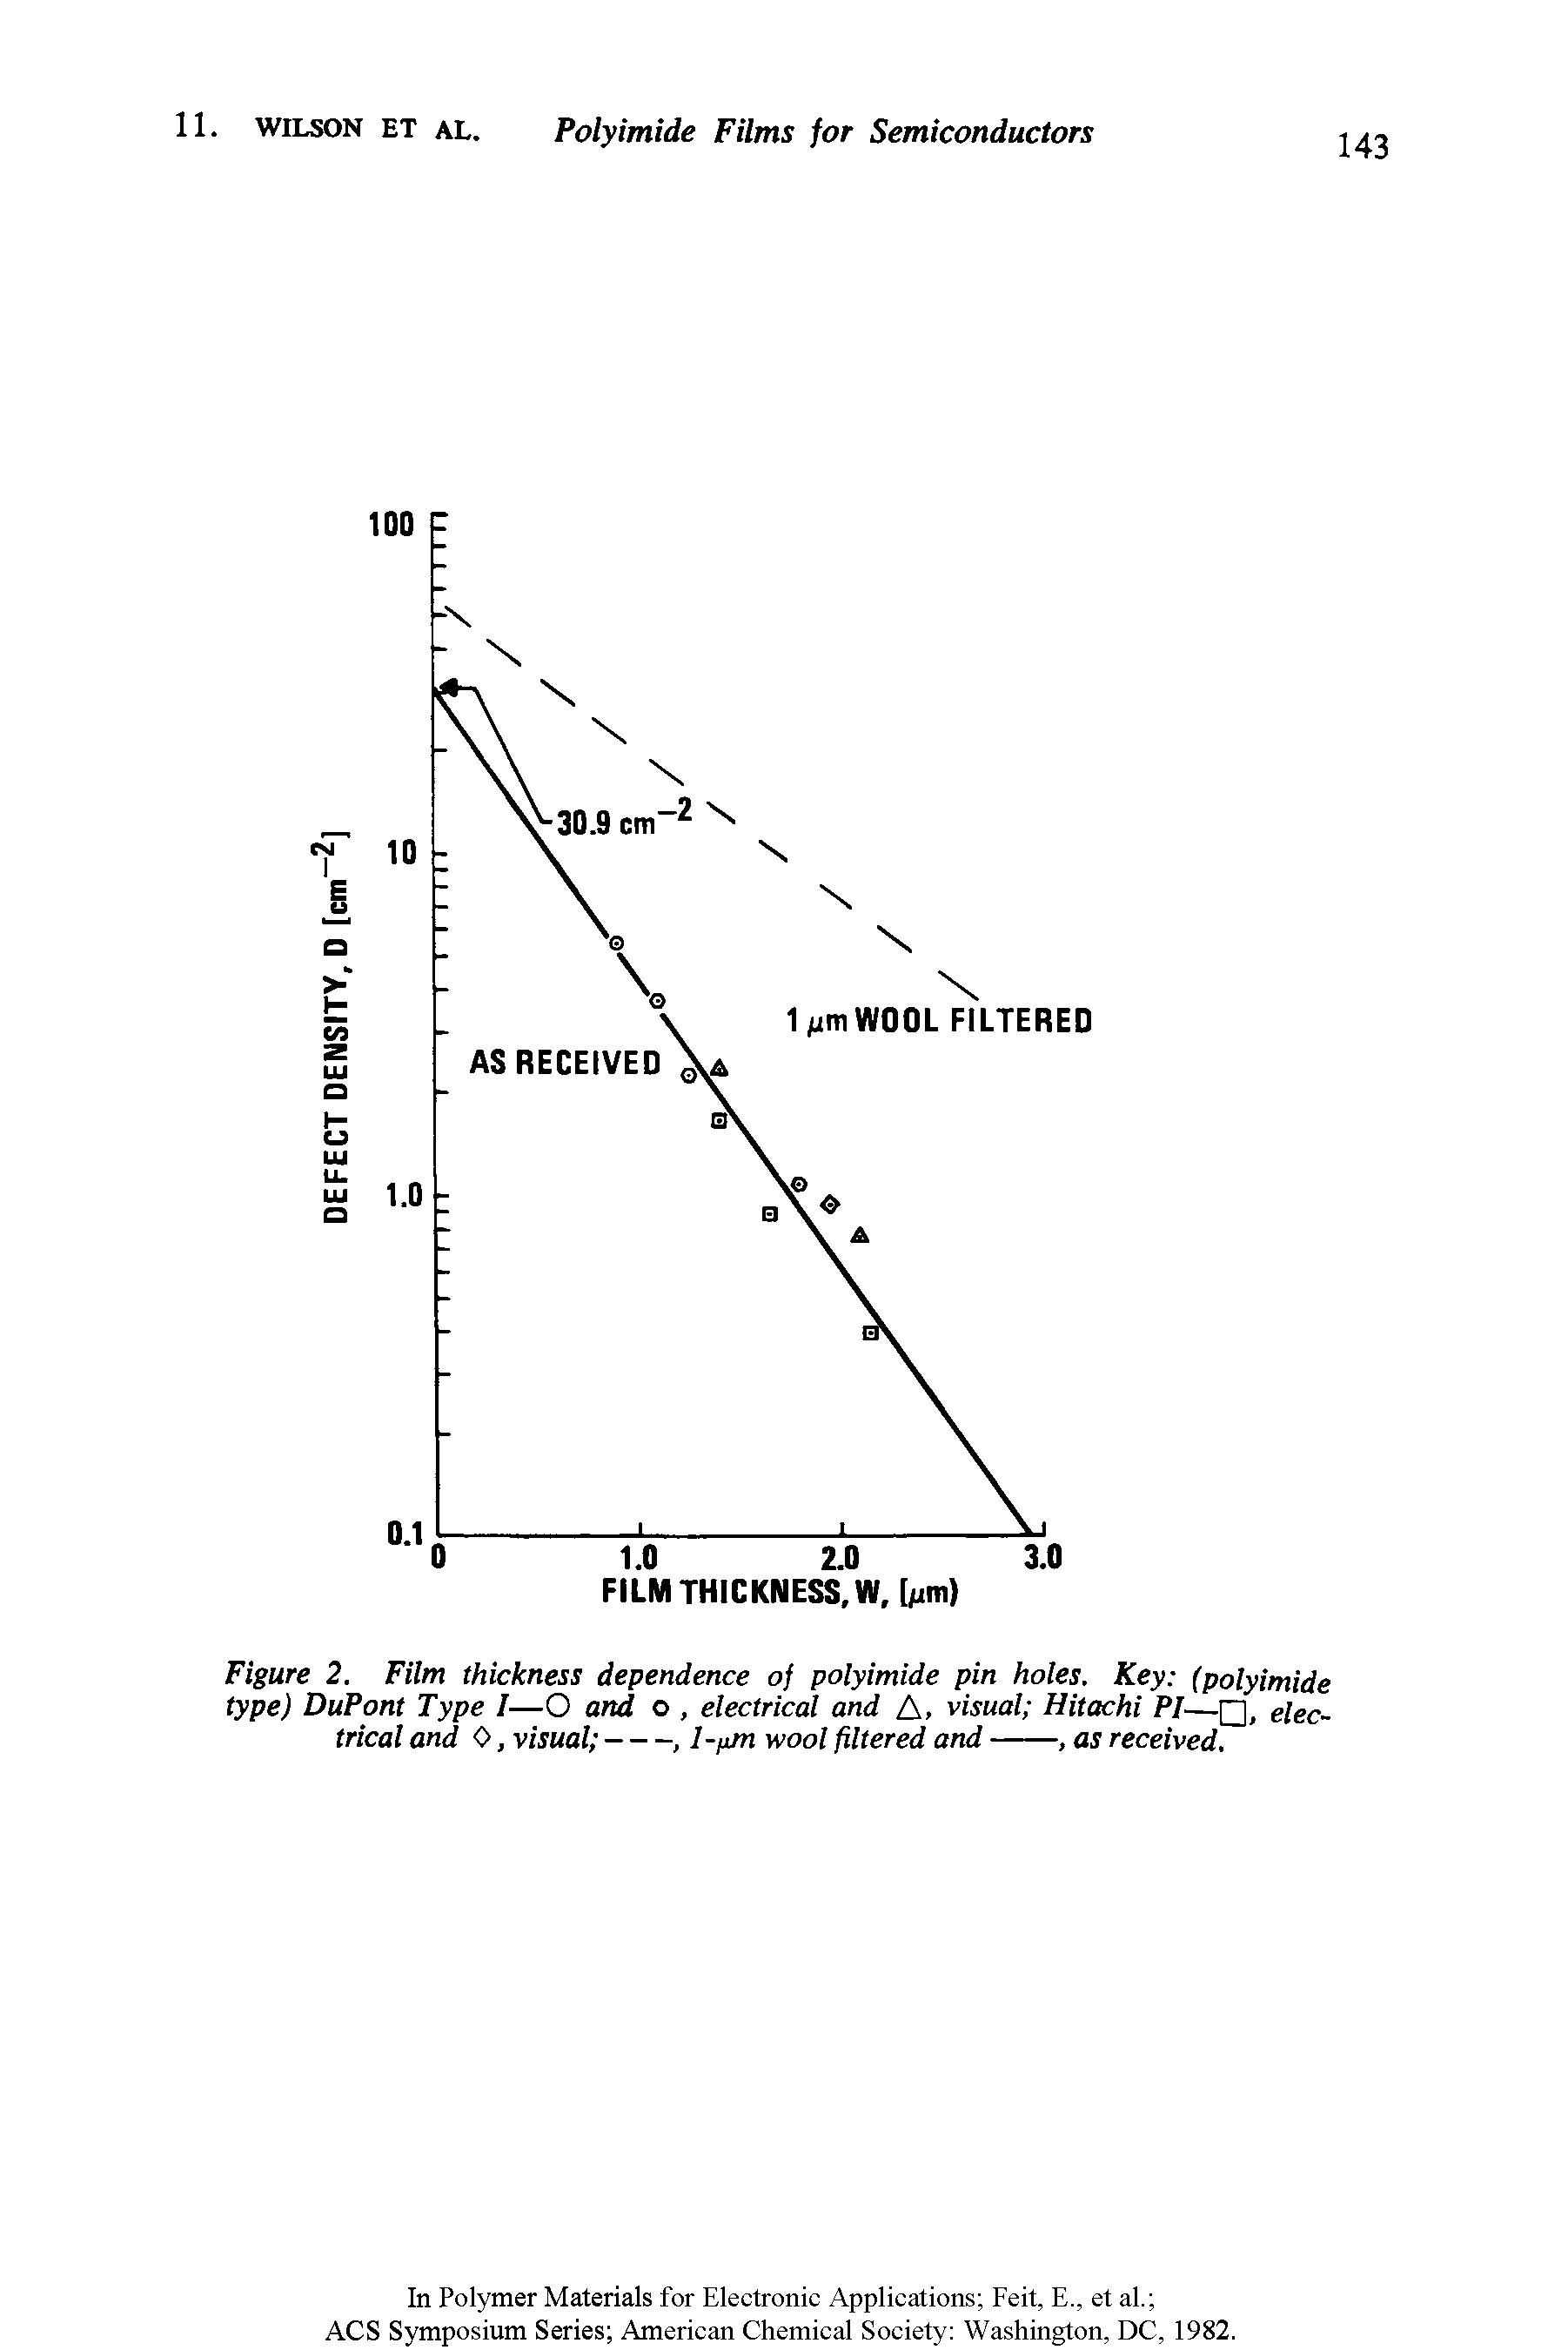 Figure 2. Film thickness dependence of polyimide pin holes. Key (polyimide type) DuPont Type I—O and o, electrical and A, visual Hitachi PI— , electrical and 0, visual ---------, l-juw wool filtered and-, as received.